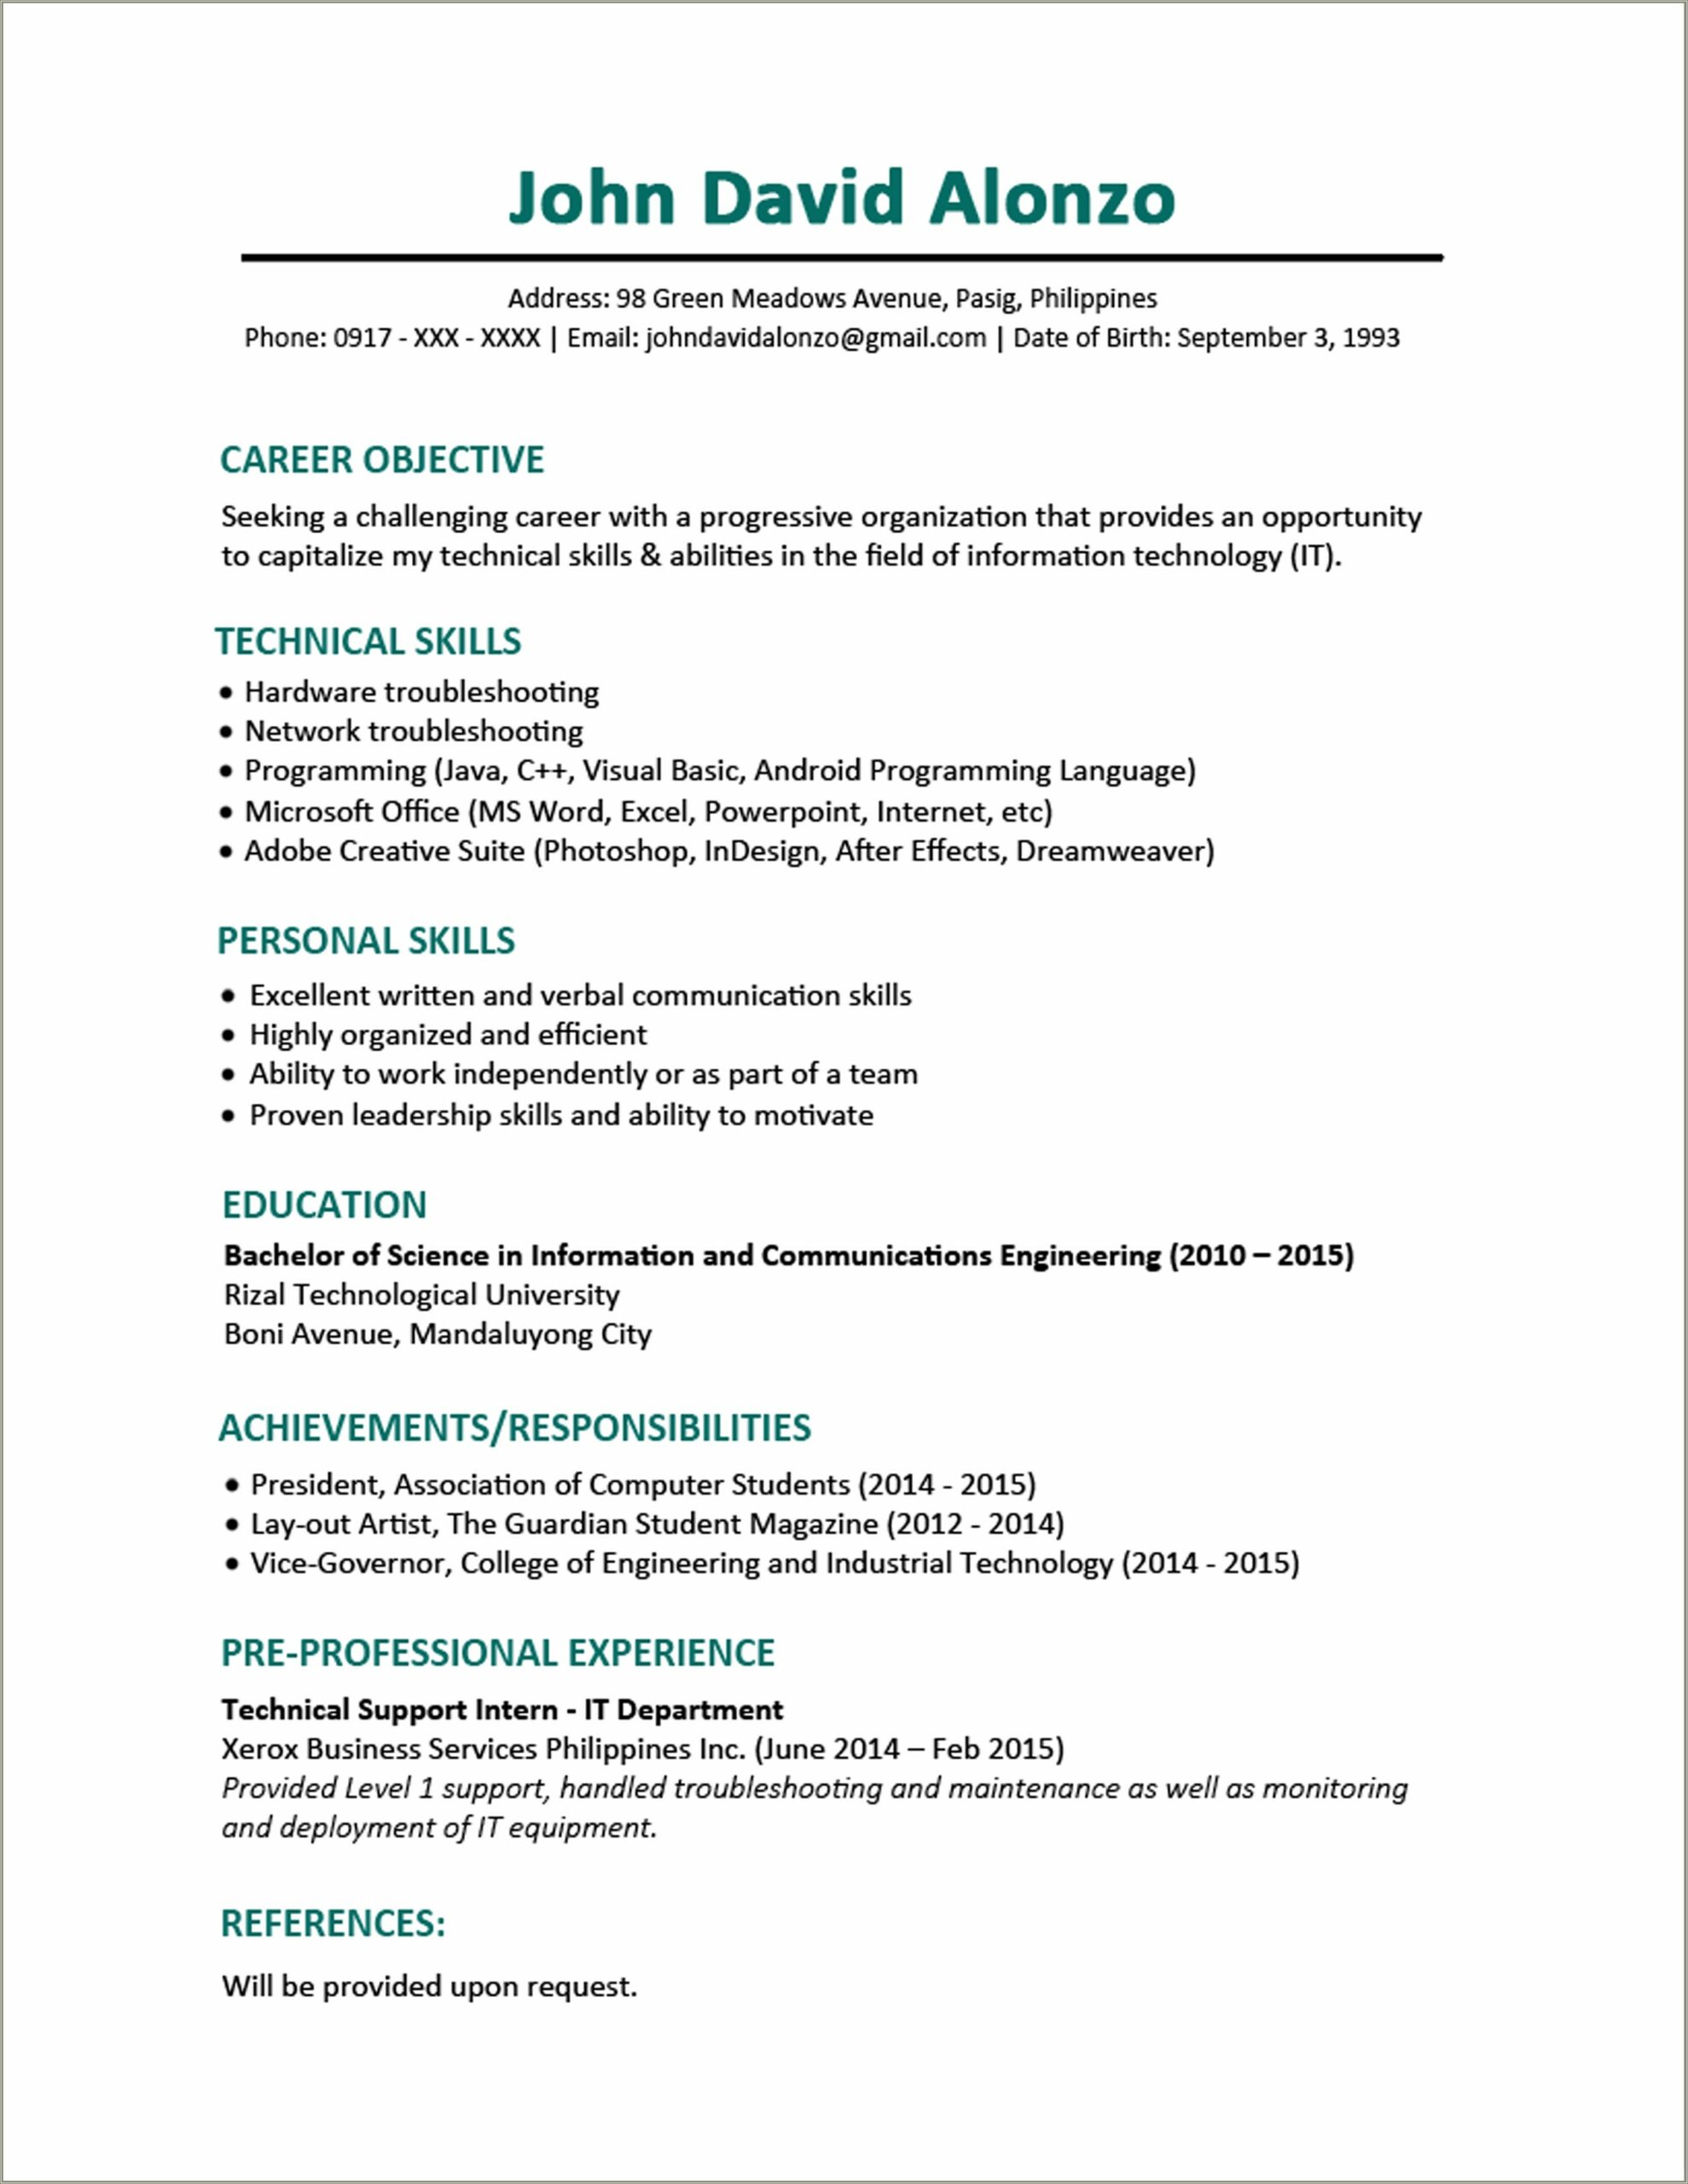 Resume Objective Examples For It Professional Job Seekers